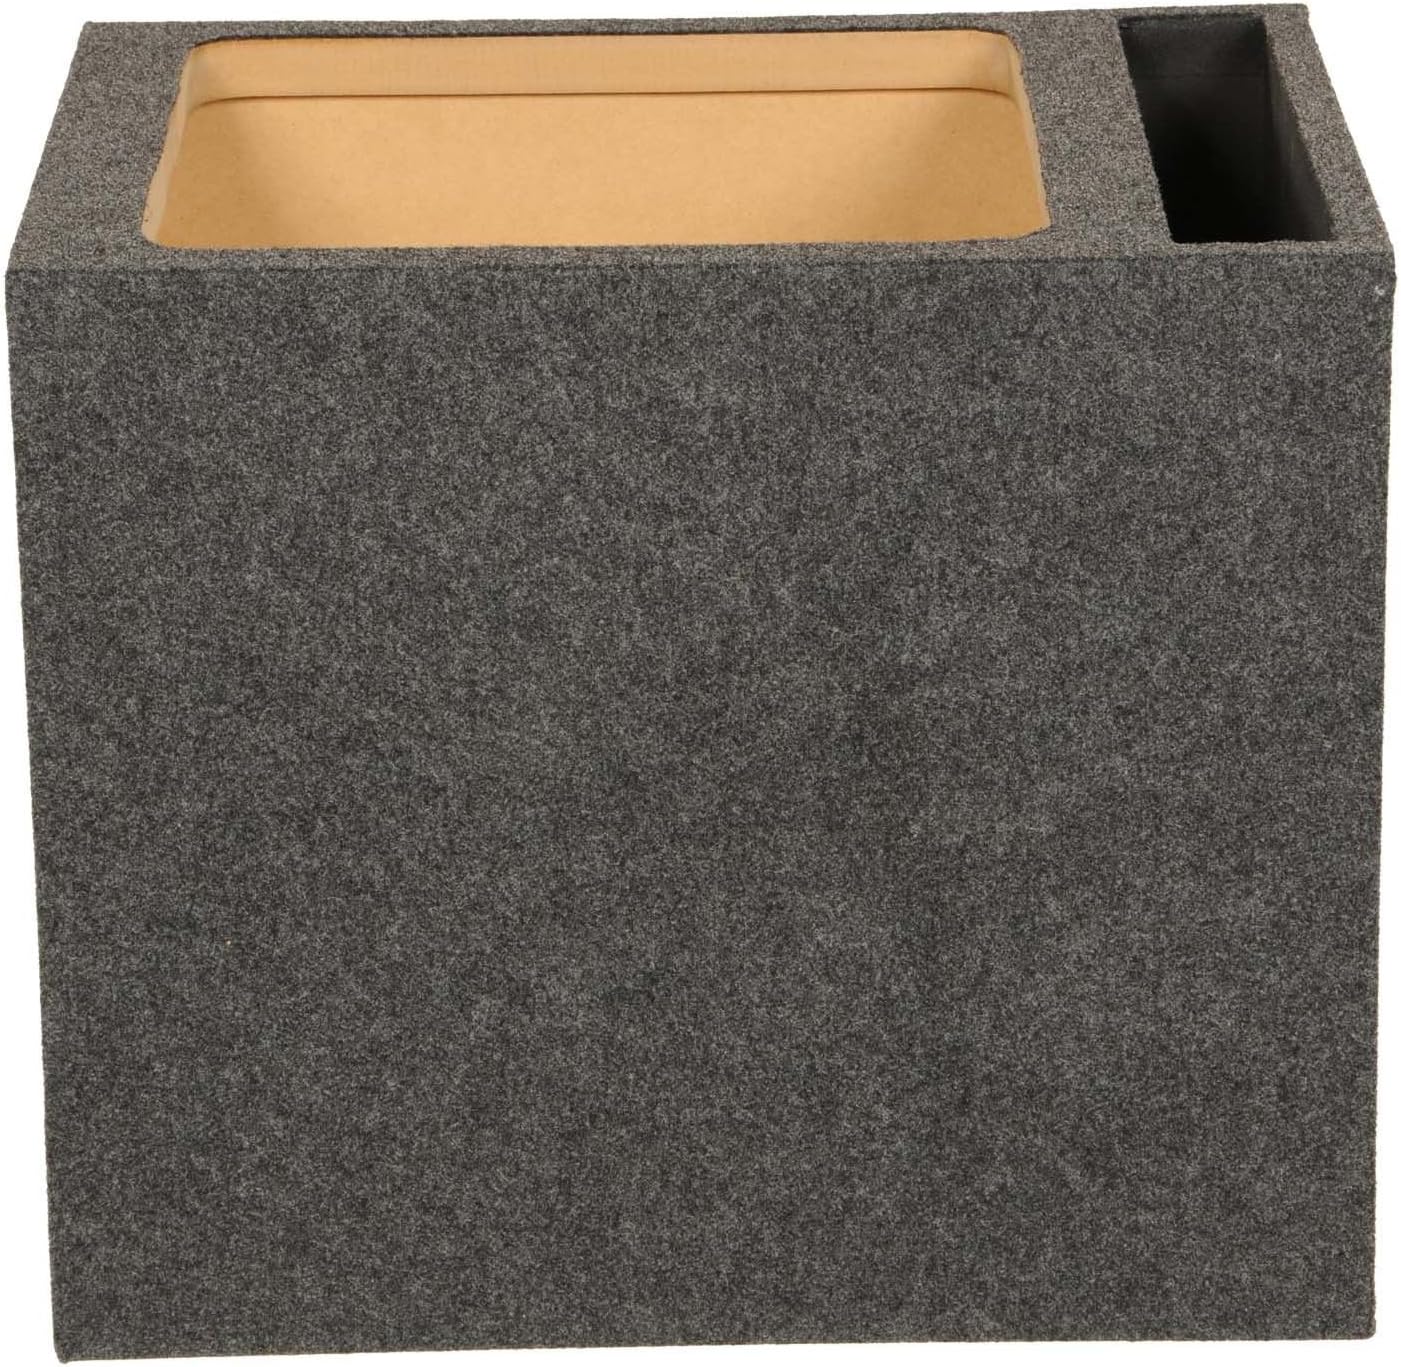 Q Power 15 Inch Heavy-Duty Single Vented Carpet Covered Durable Car Audio Vehicle Subwoofer Enclosure Woofer Box, Charcoal Gray